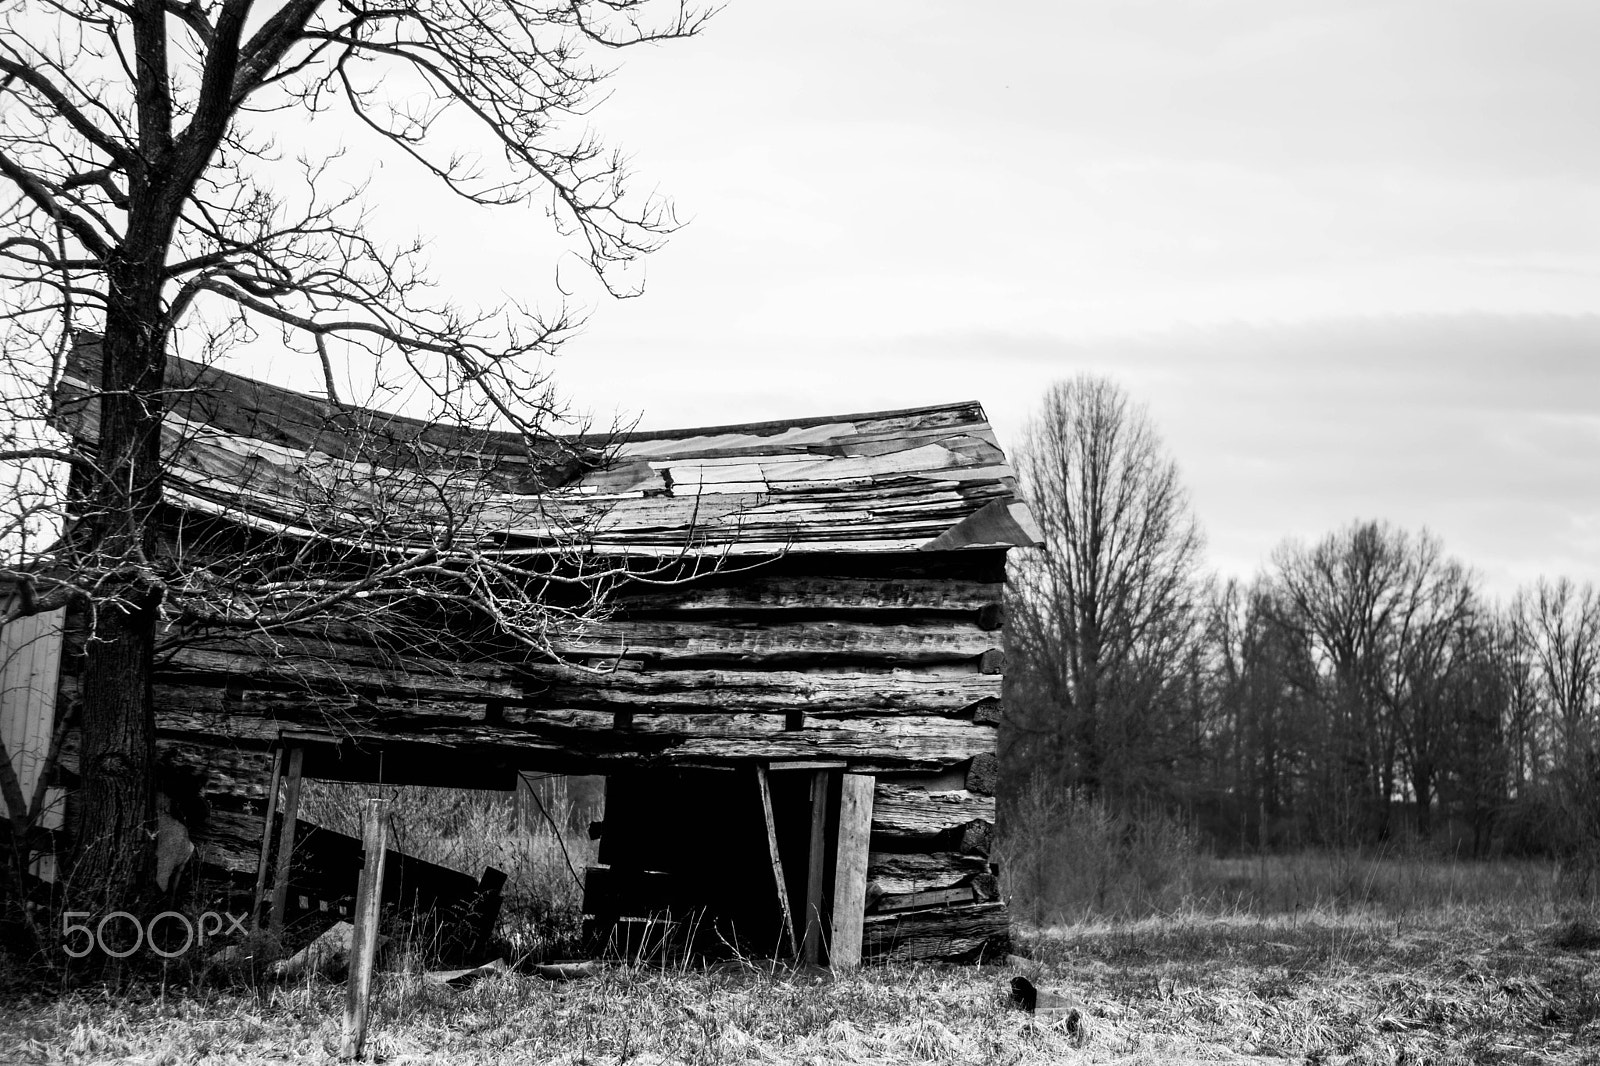 Nikon D5300 + AF-S DX VR Zoom-Nikkor 18-55mm f/3.5-5.6G + 2.8x sample photo. This old barn photography